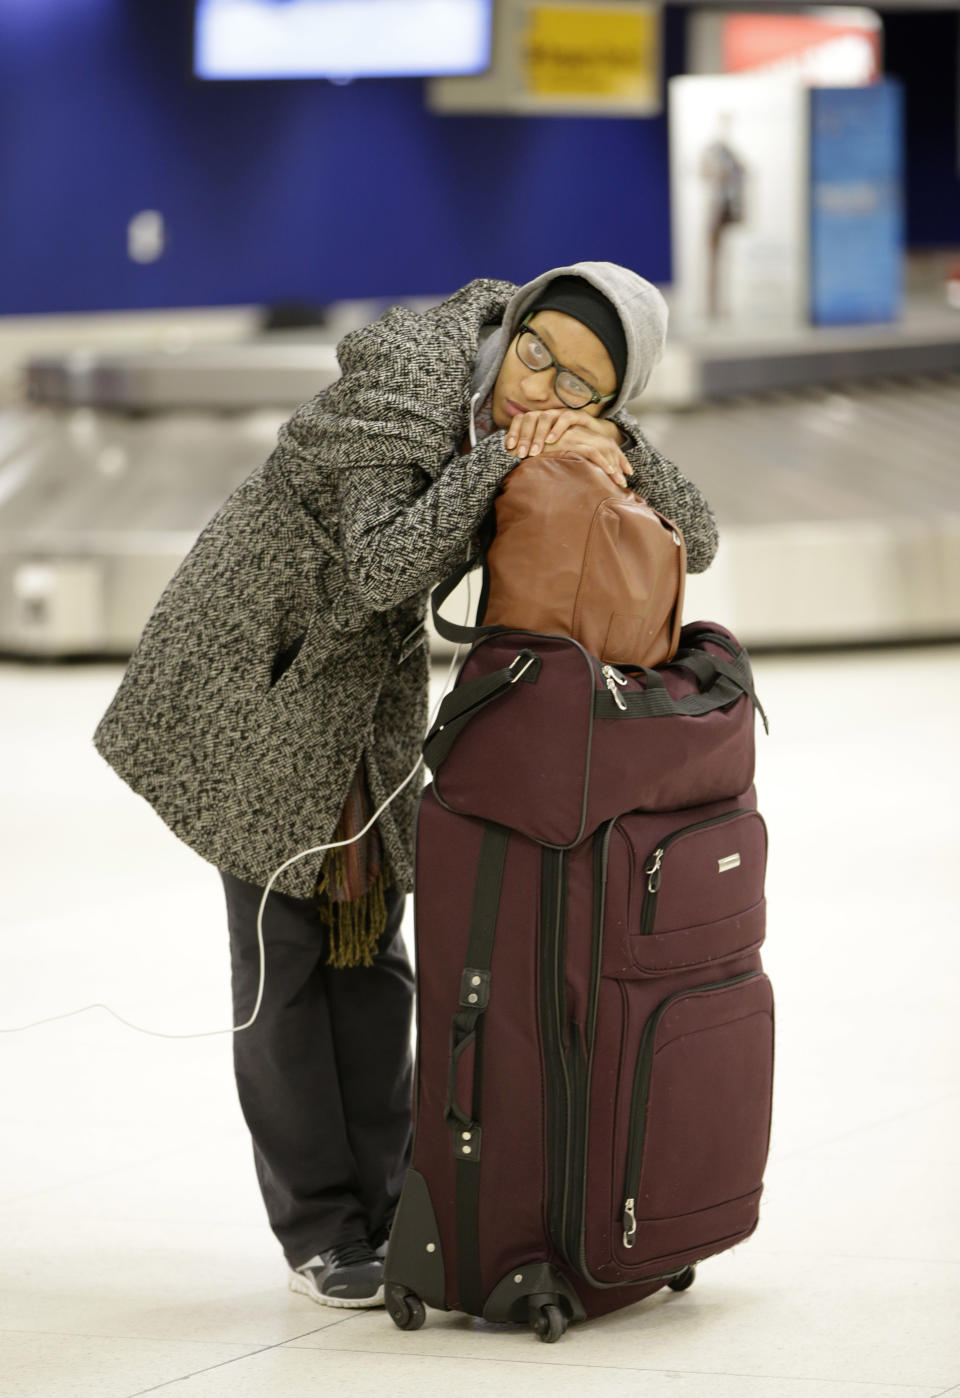 A woman, who did not want to be identified, rests on her luggage as she waits in the baggage area of Terminal 2 at Kennedy International Airport after a Delta flight from Toronto to New York skidded off the runway into a snow bank, temporarily halting all airport flights, Sunday, Jan. 5, 2014, in New York. (AP Photo/Kathy Willens)